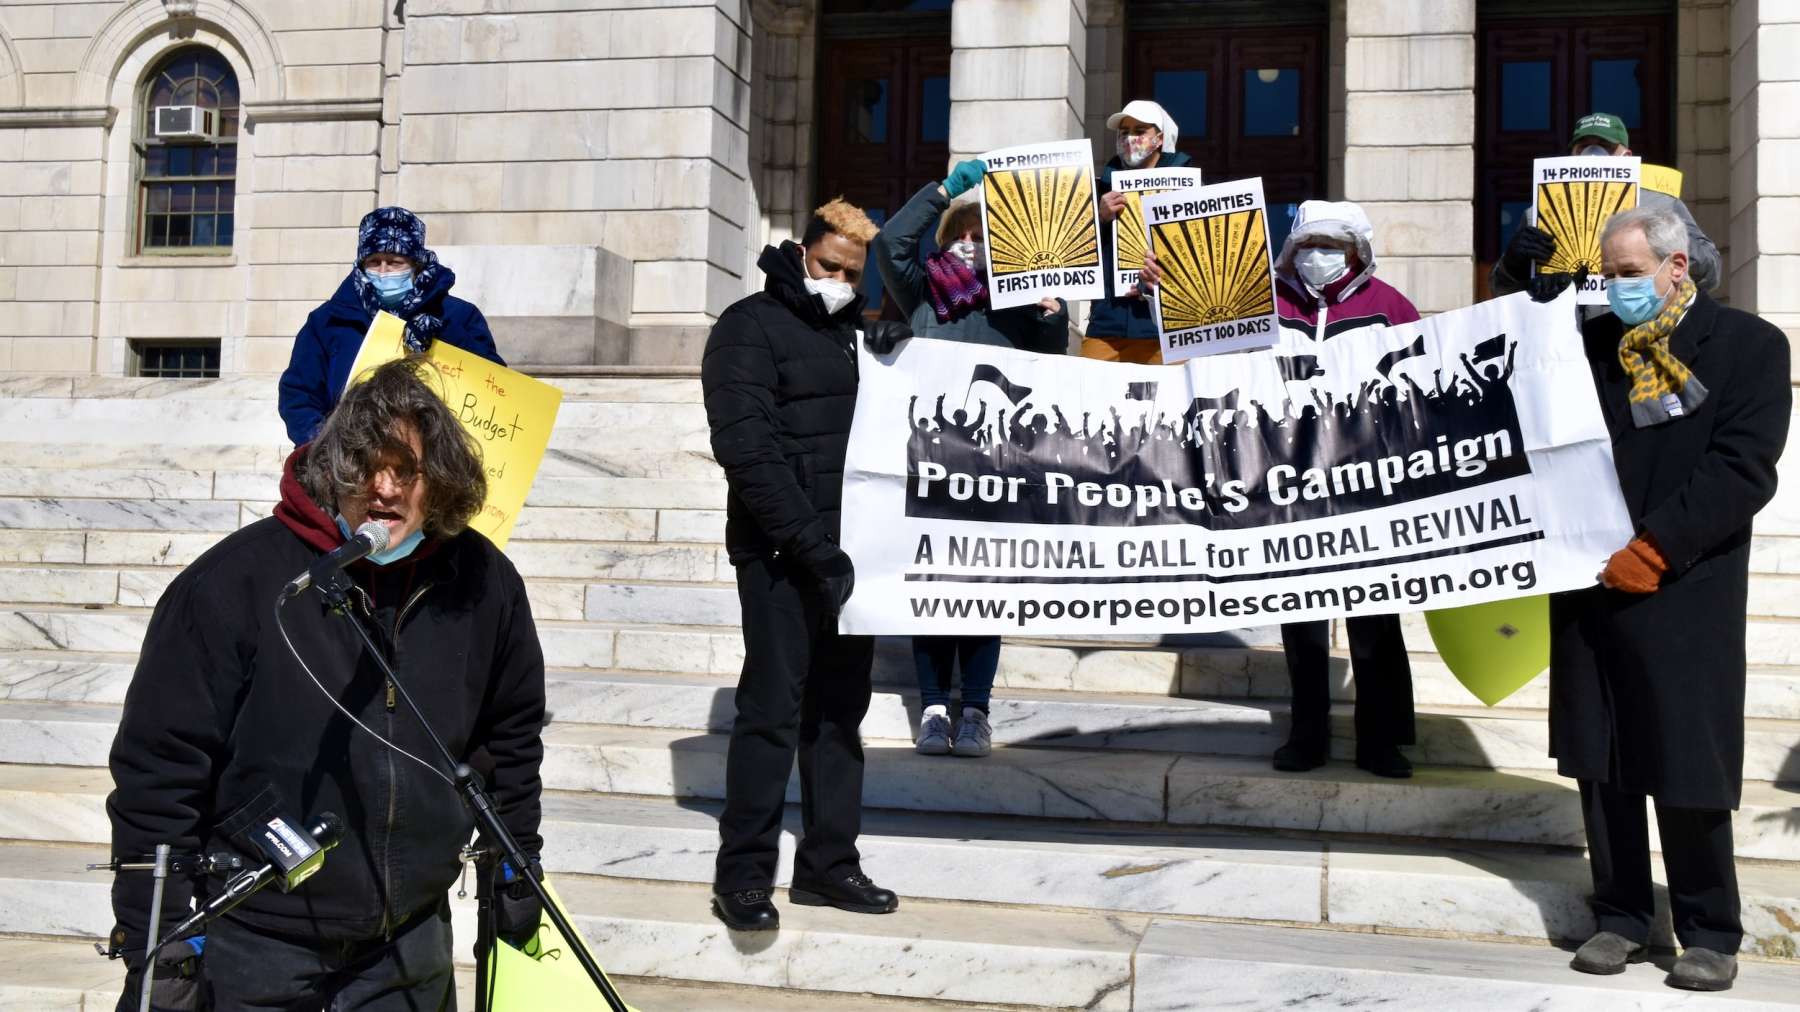 The RI Poor People’s Campaign ‘nails’ their moral agenda to the State House doors